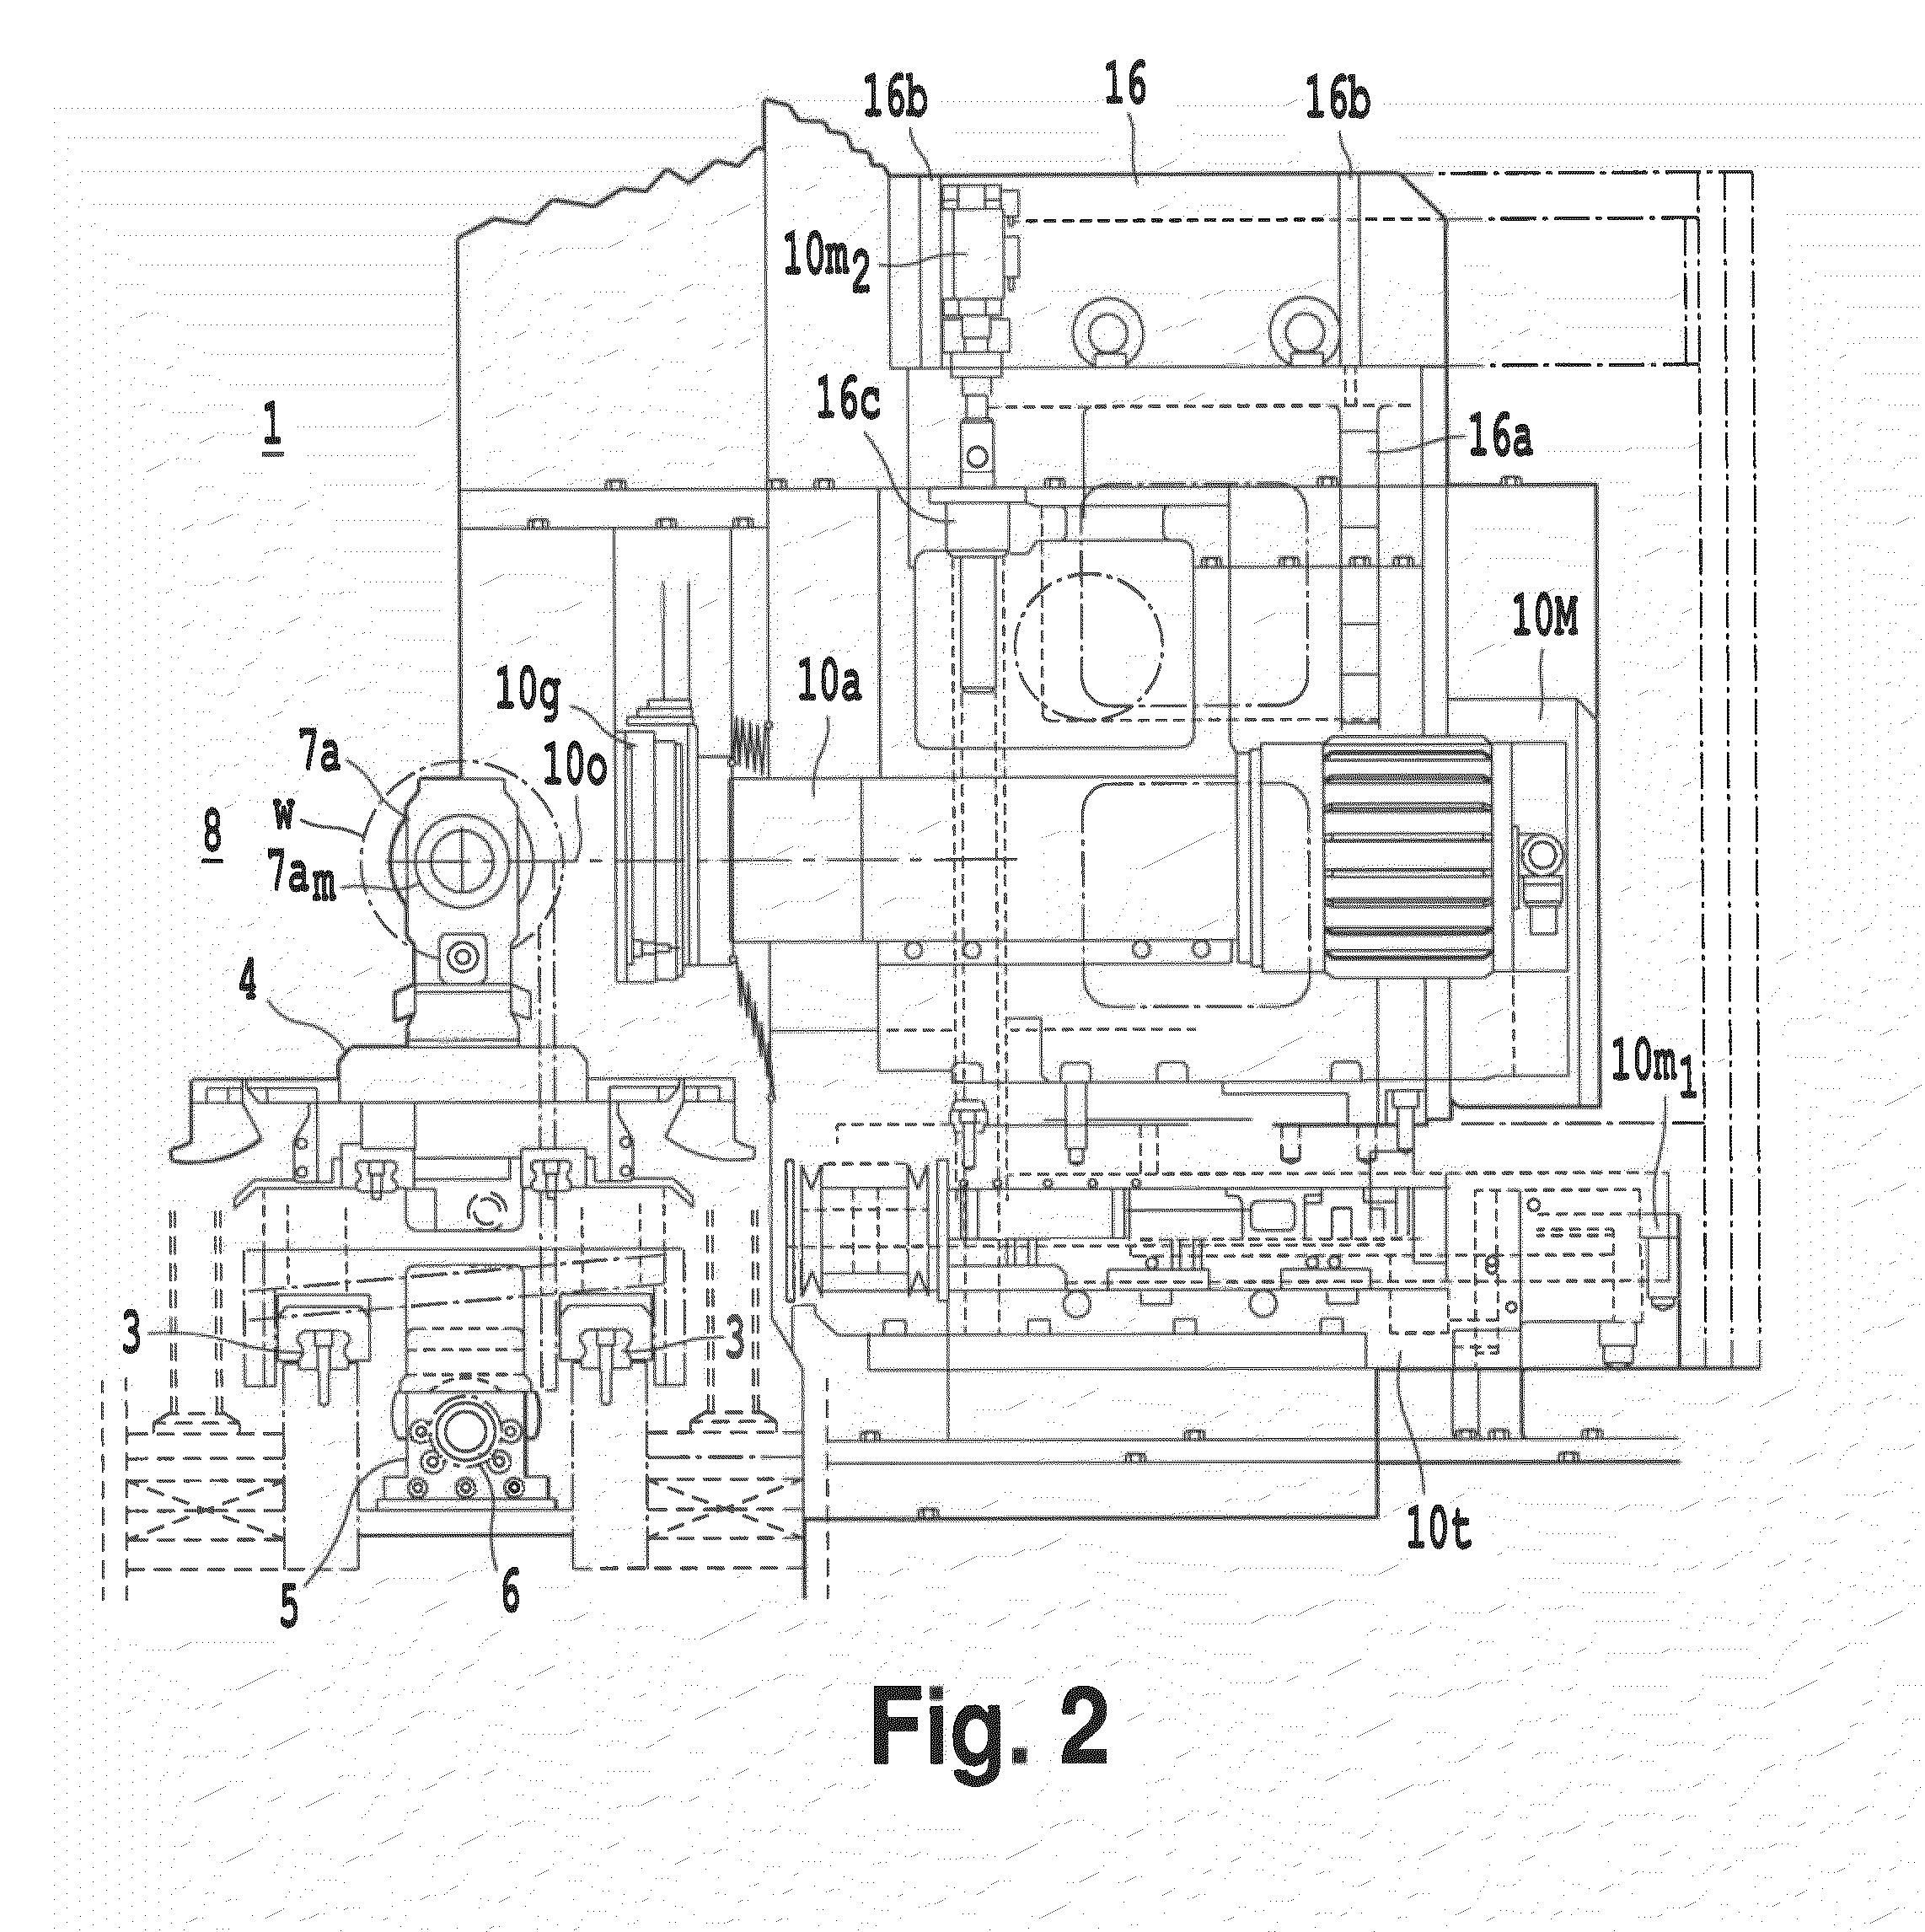 Complex apparatus and method for polishing an ingot block